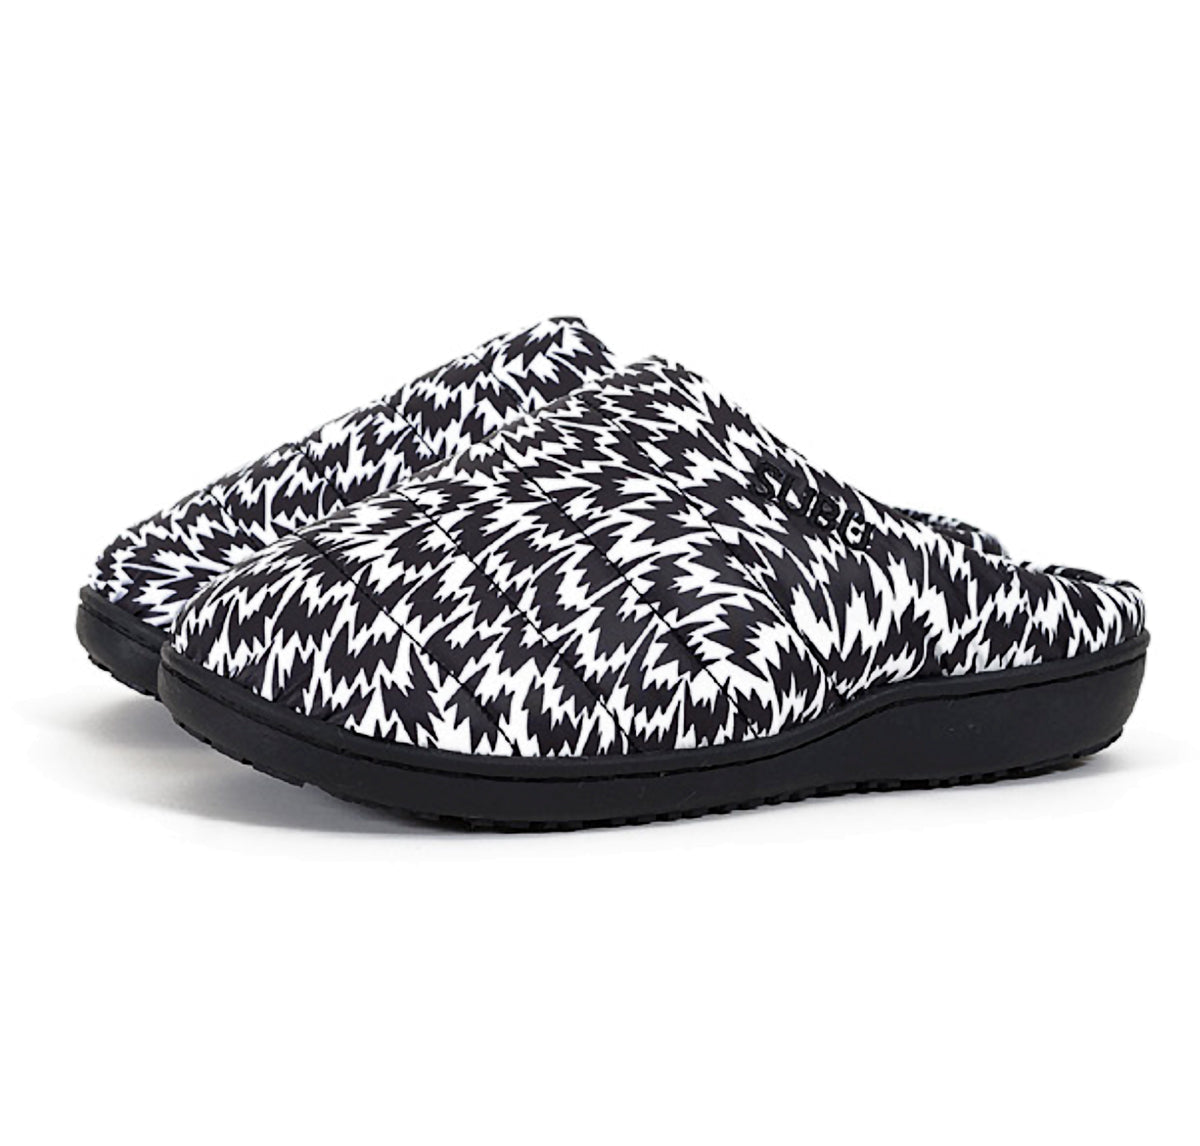 SUBU, Fall & Winter Concept Slippers Flash, Size, 0, Slippers,